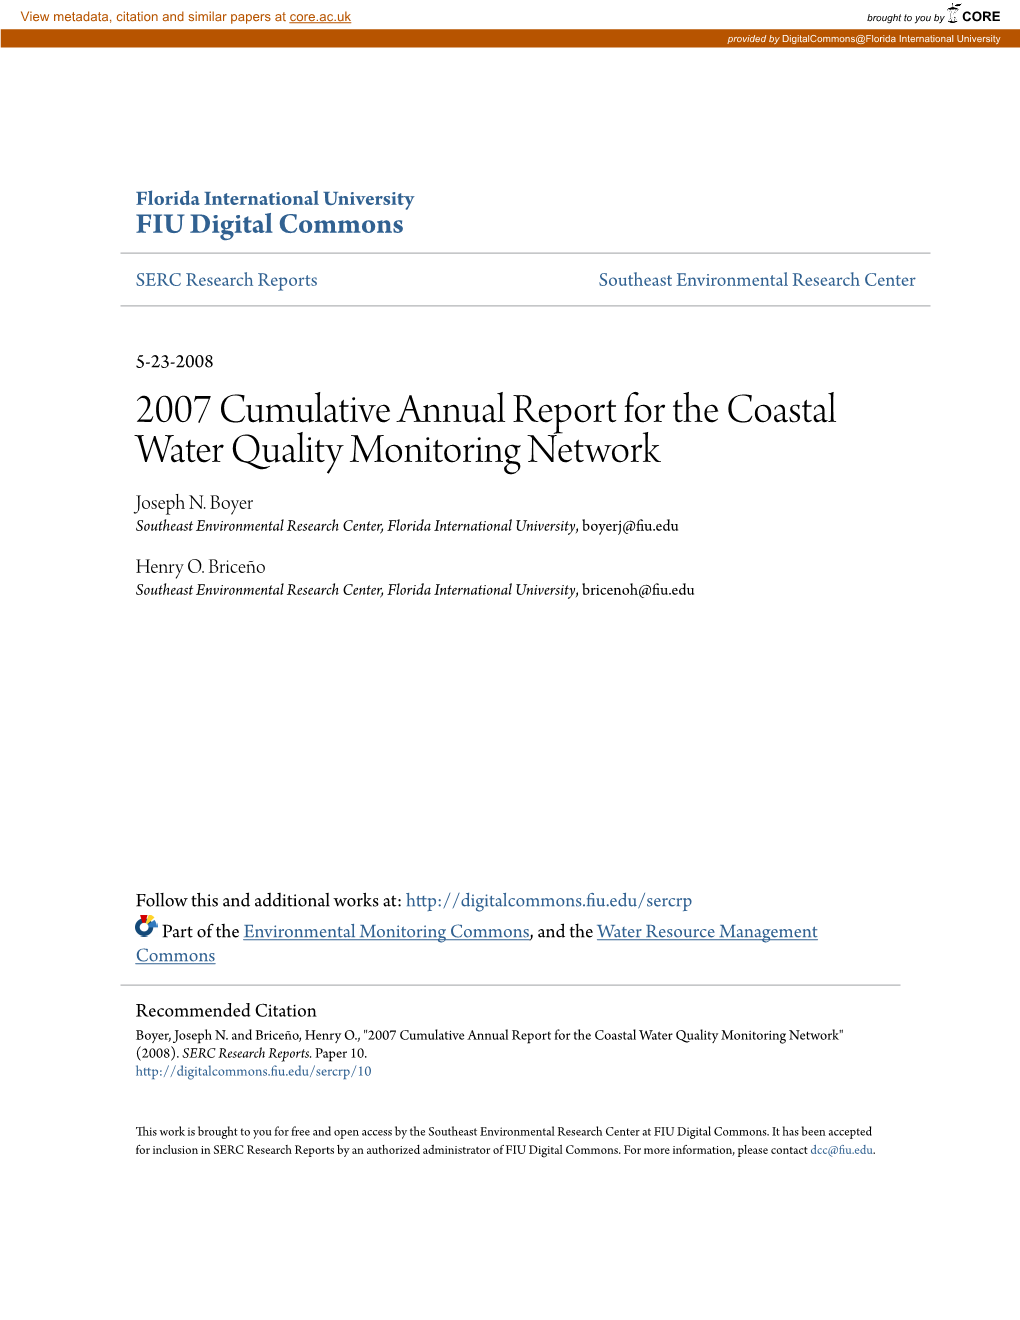 2007 Cumulative Annual Report for the Coastal Water Quality Monitoring Network Joseph N